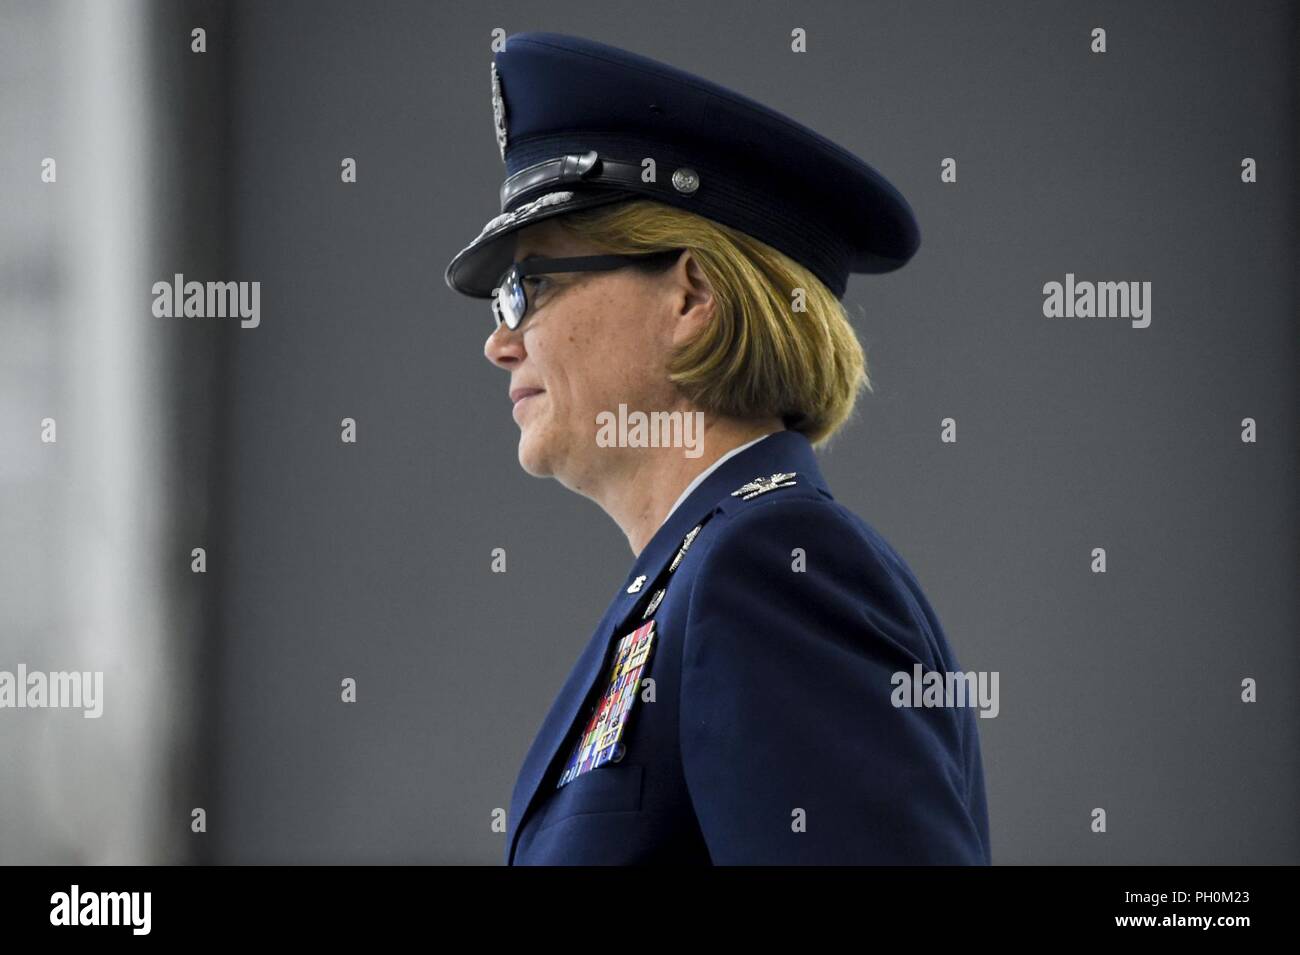 Col. Rebecca Sonkiss, 89th Airlift Wing commander looks over a formation of Airmen, June 15, 2018 during a change of command ceremony at Joint Base Andrews, Md. Sonkiss assumed command of the 89th AW from Col. Casey Eaton. Sonkiss is a command pilot with more than 4,200 hours in the T-37B, T-44, EC-130/H, RQ-1A/B, C-130J and C-17 aircraft. She has 24 years of active-duty service and arrived at JBA from Joint Base Lewis-McCord, Wash. where she was the 62nd Airlift Wing commander. Stock Photo